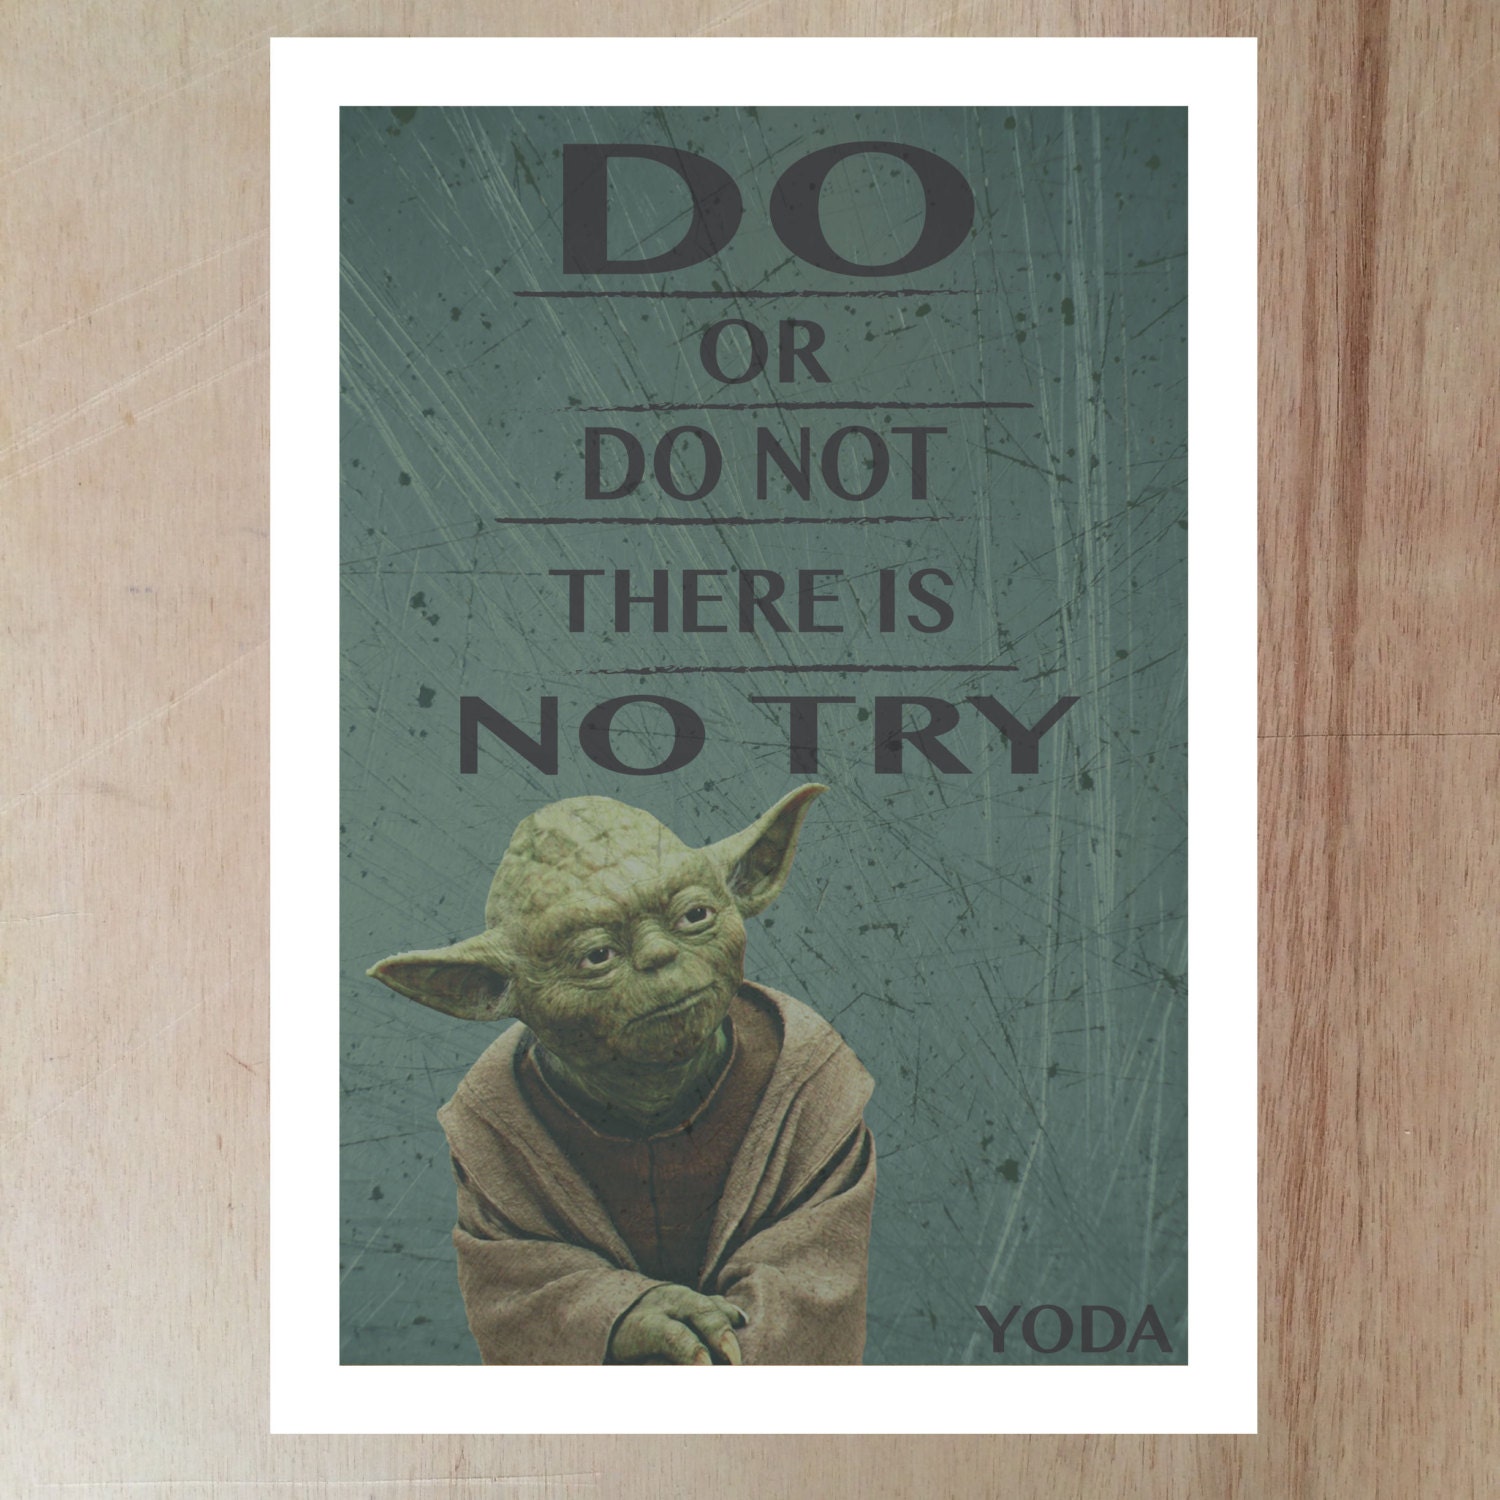 Yoda Quotes Do Do Not 50 Famous Yoda Quotes To Help You Stay The Light Side